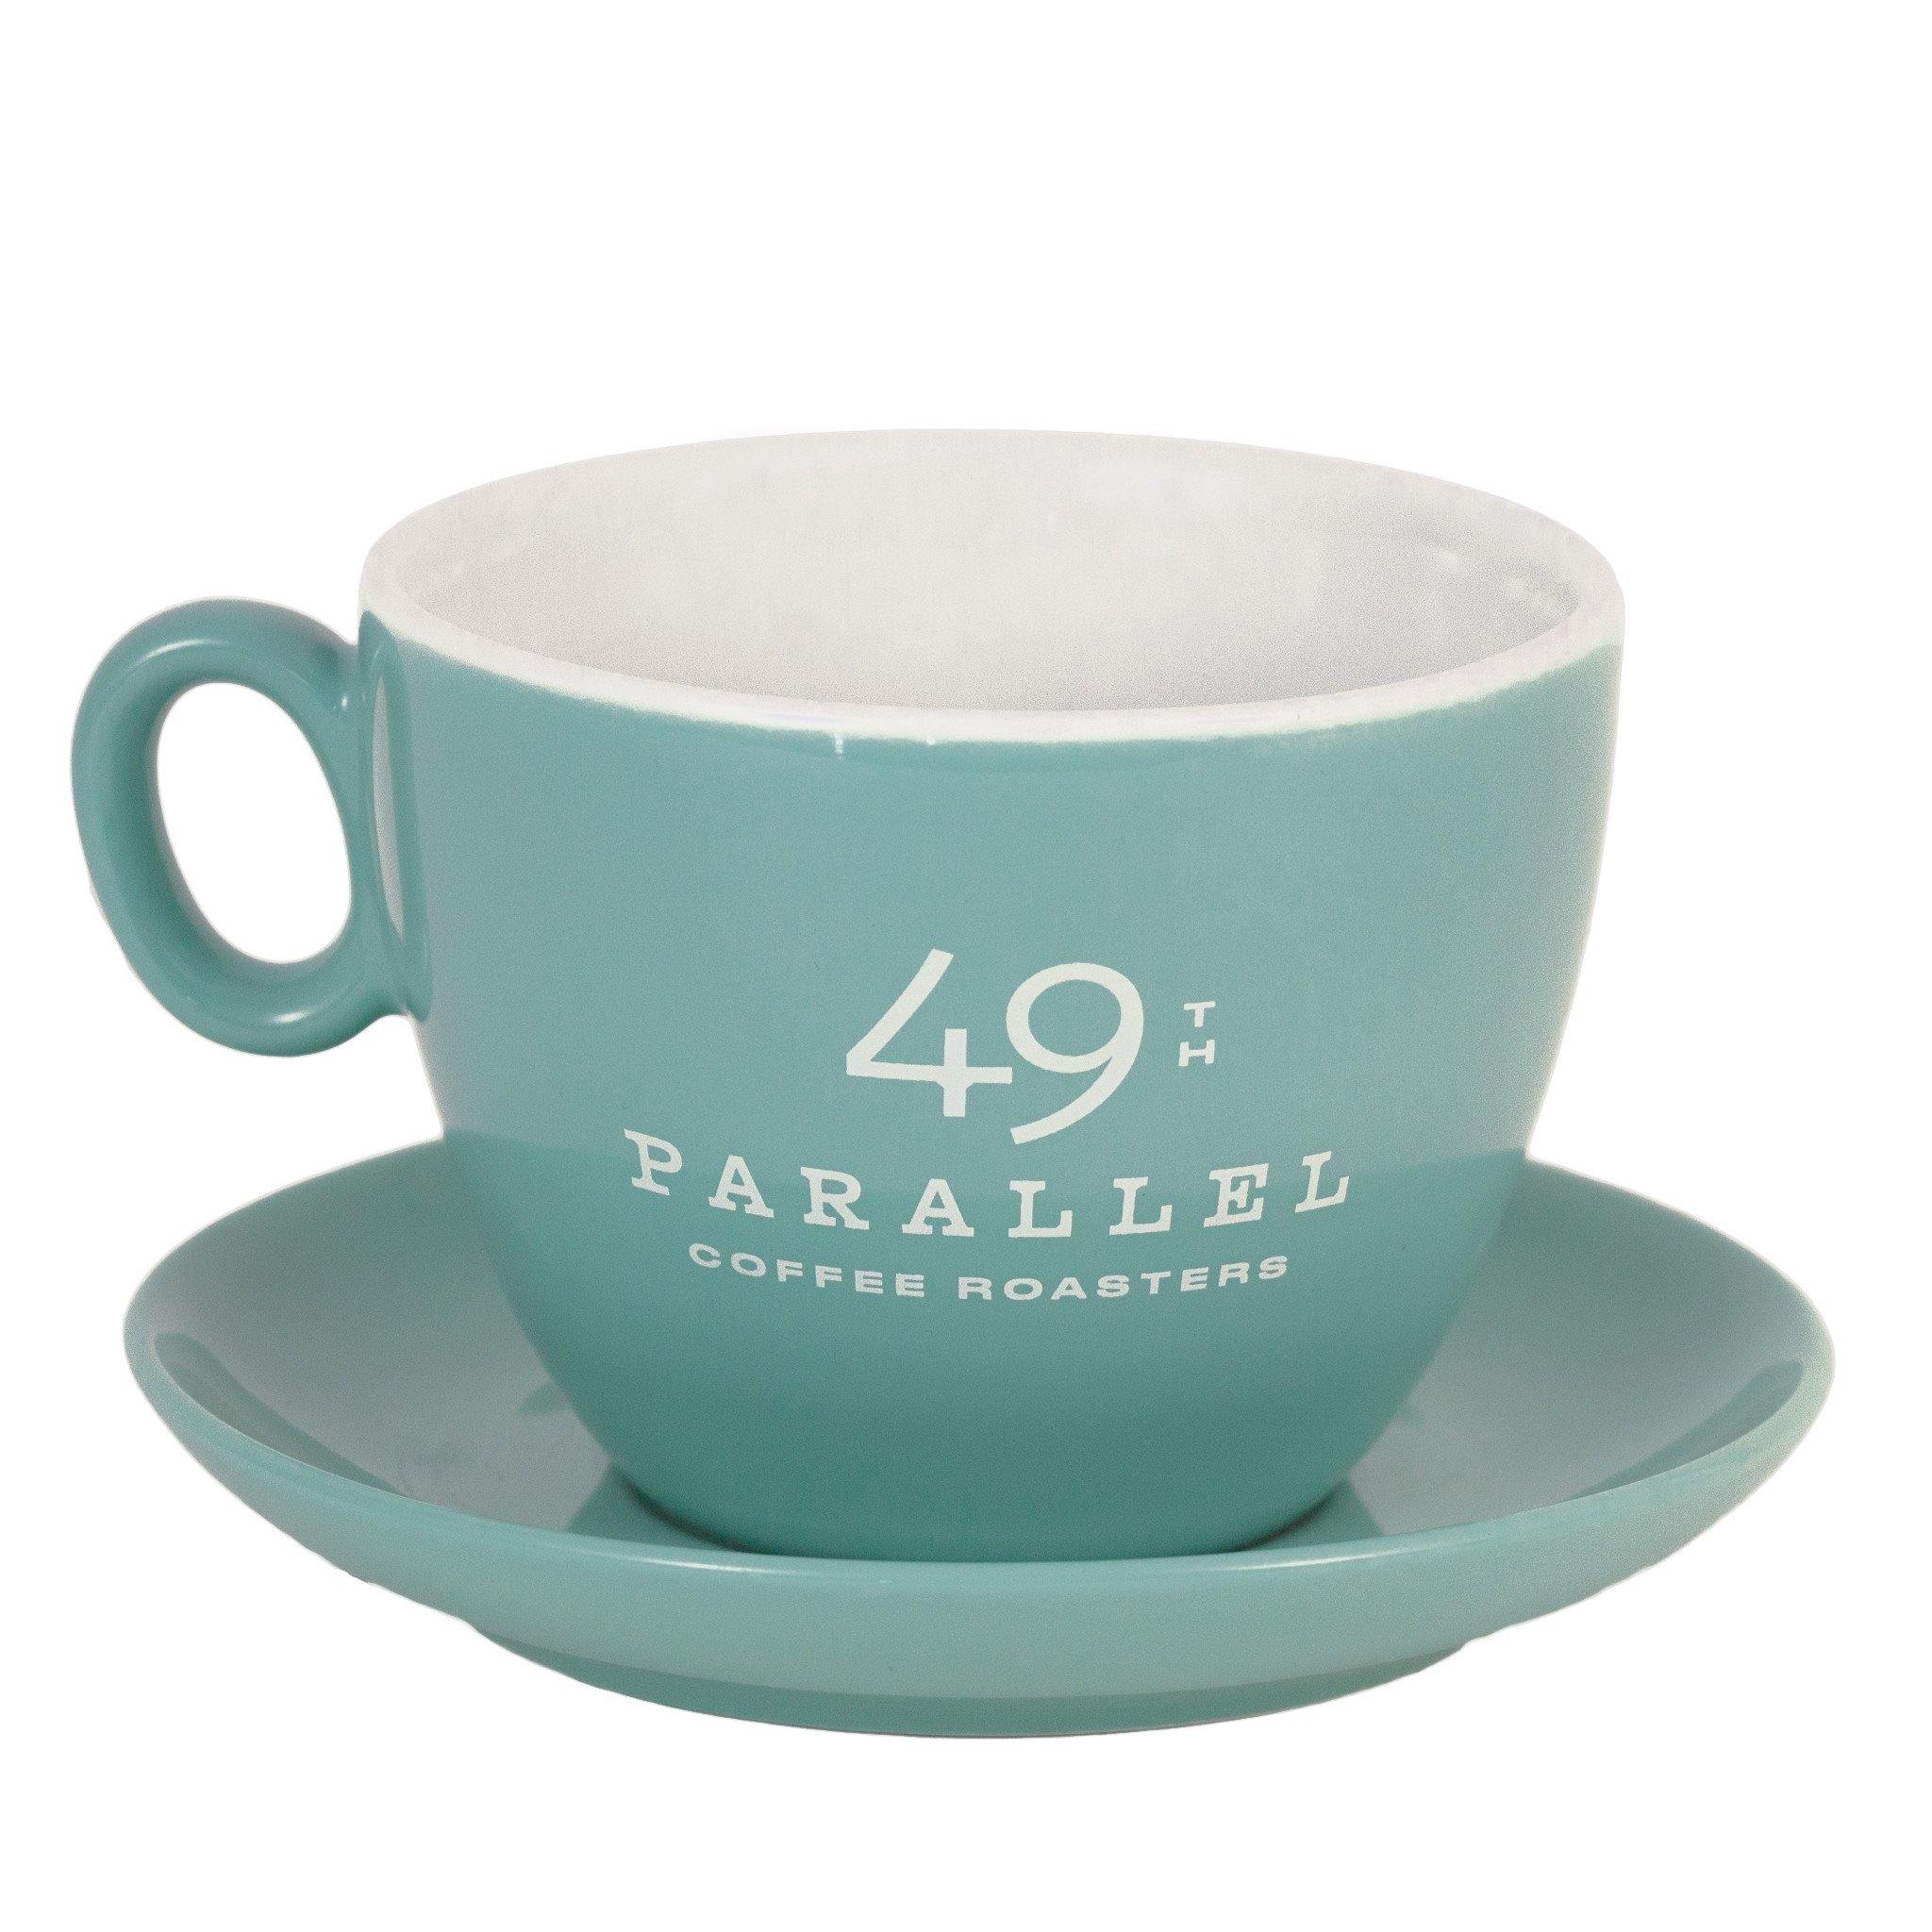 17.5 oz Large Drip Cup & Saucer - 49th Parallel Coffee Roasters